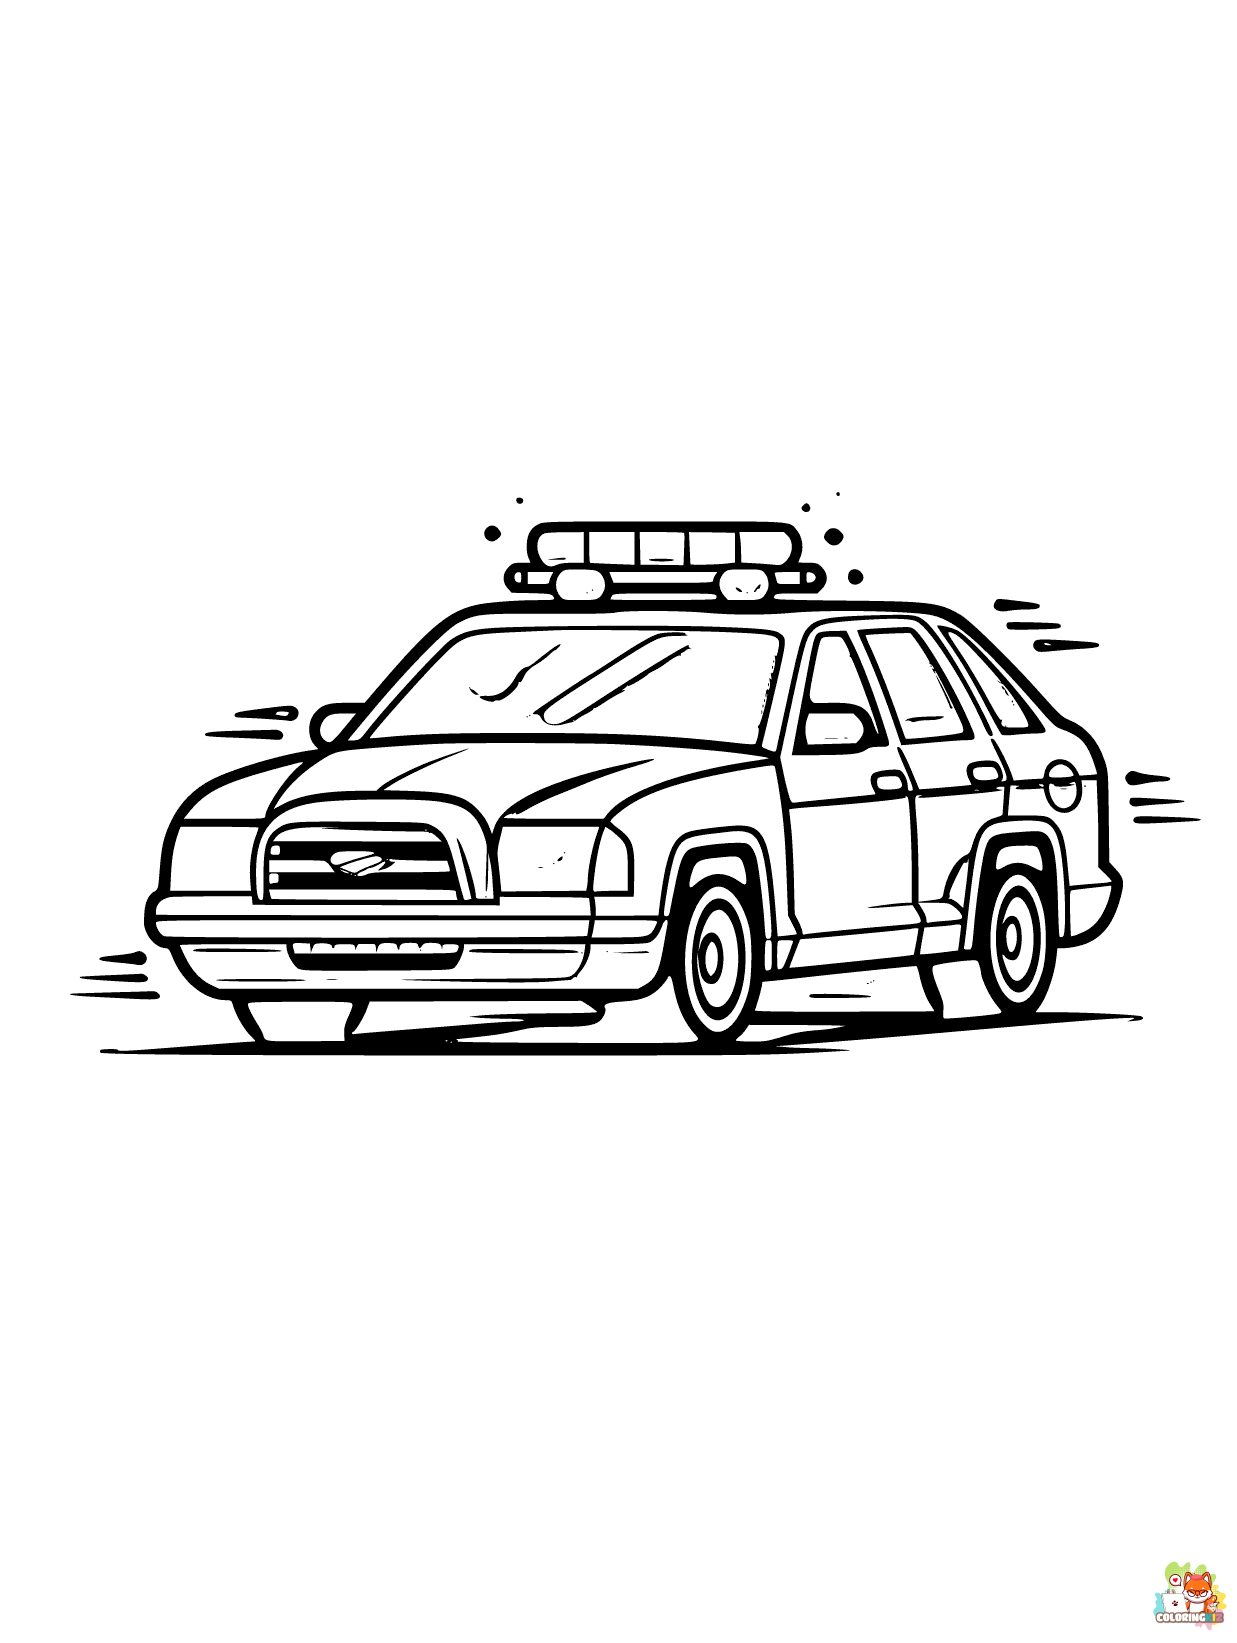 N1 Midjourney Car Coloring pages for kids A police car with fla 7eac86c8 a7a3 4dd0 afb3 37e1203c55a6 edge